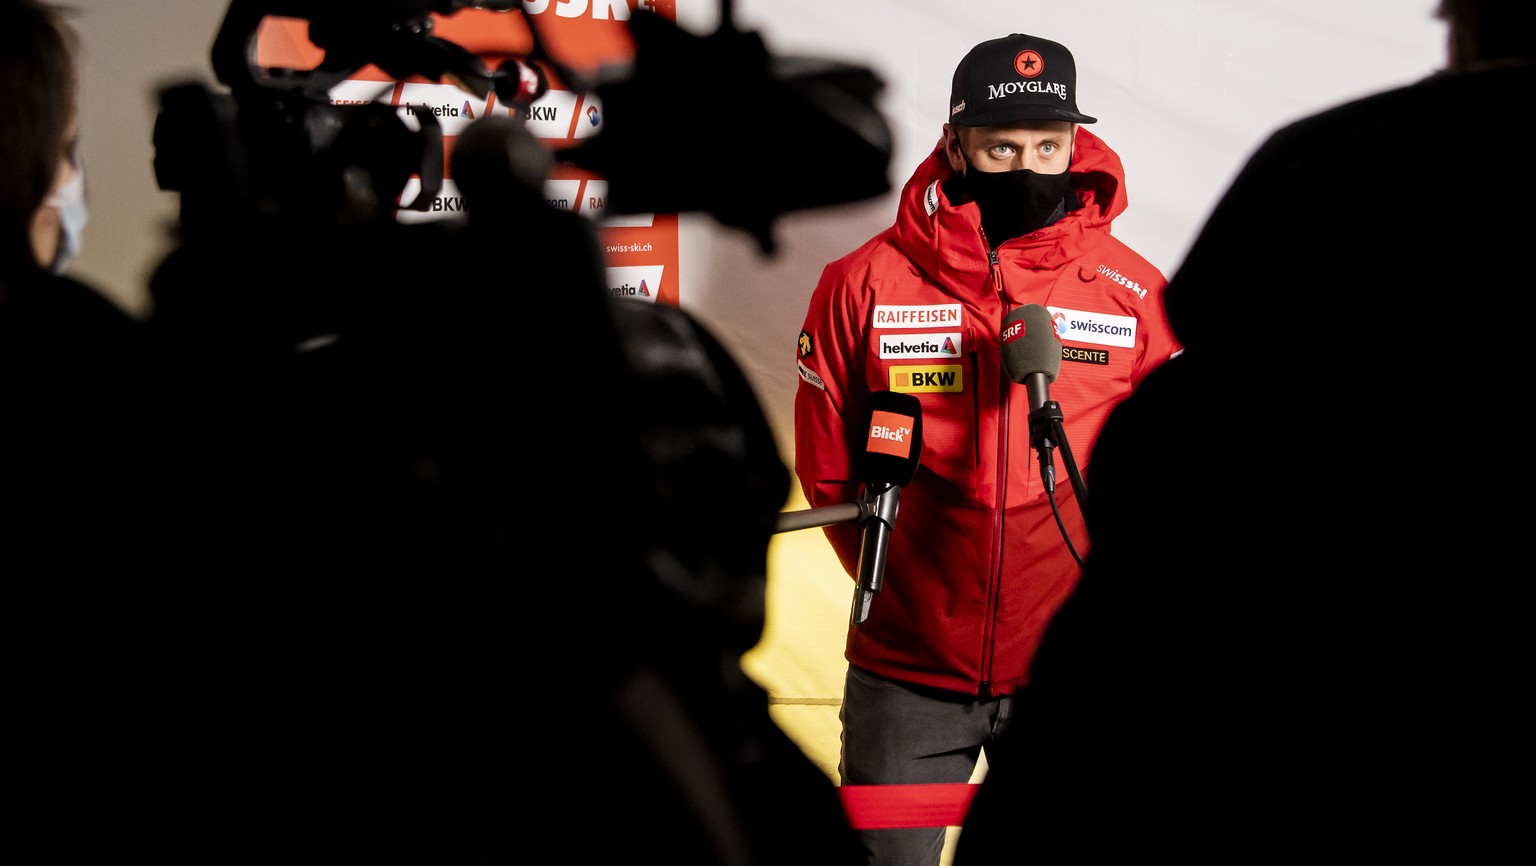 Mauro Caviezel of Switzerland speaks to journalists during the Swiss-Ski federation press conference at the 2021 FIS Alpine Skiing World Championships in Cortina d&#039;Ampezzo, Italy, Sunday, Februar ...